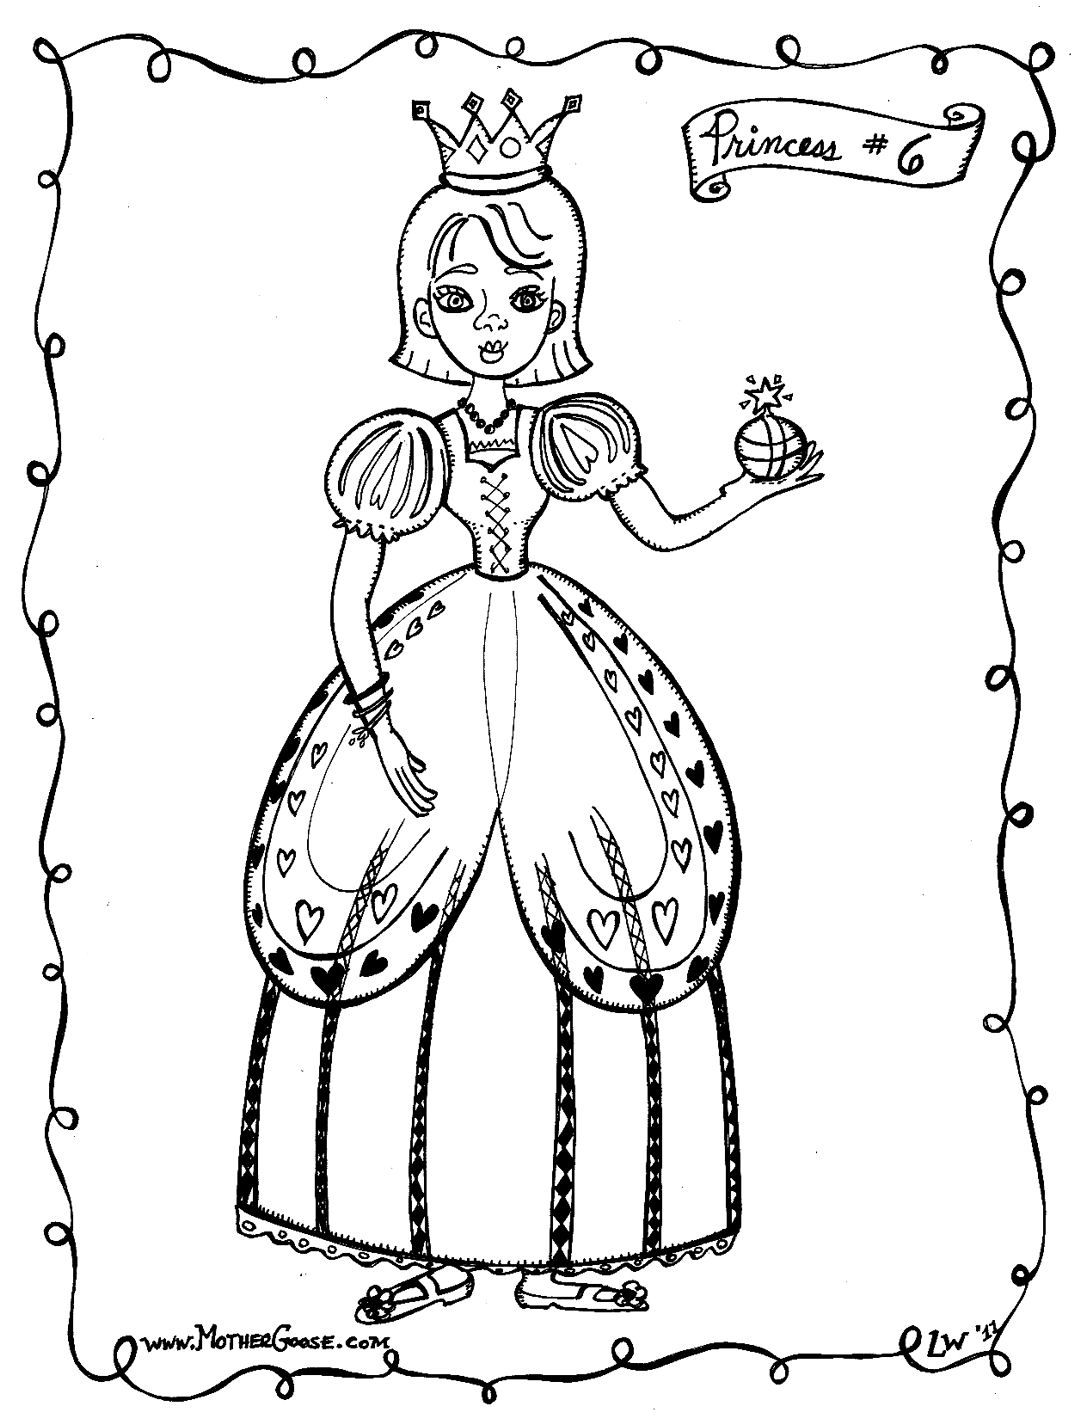 6 free Princess Coloring Pages, printable paper craft for girls ...